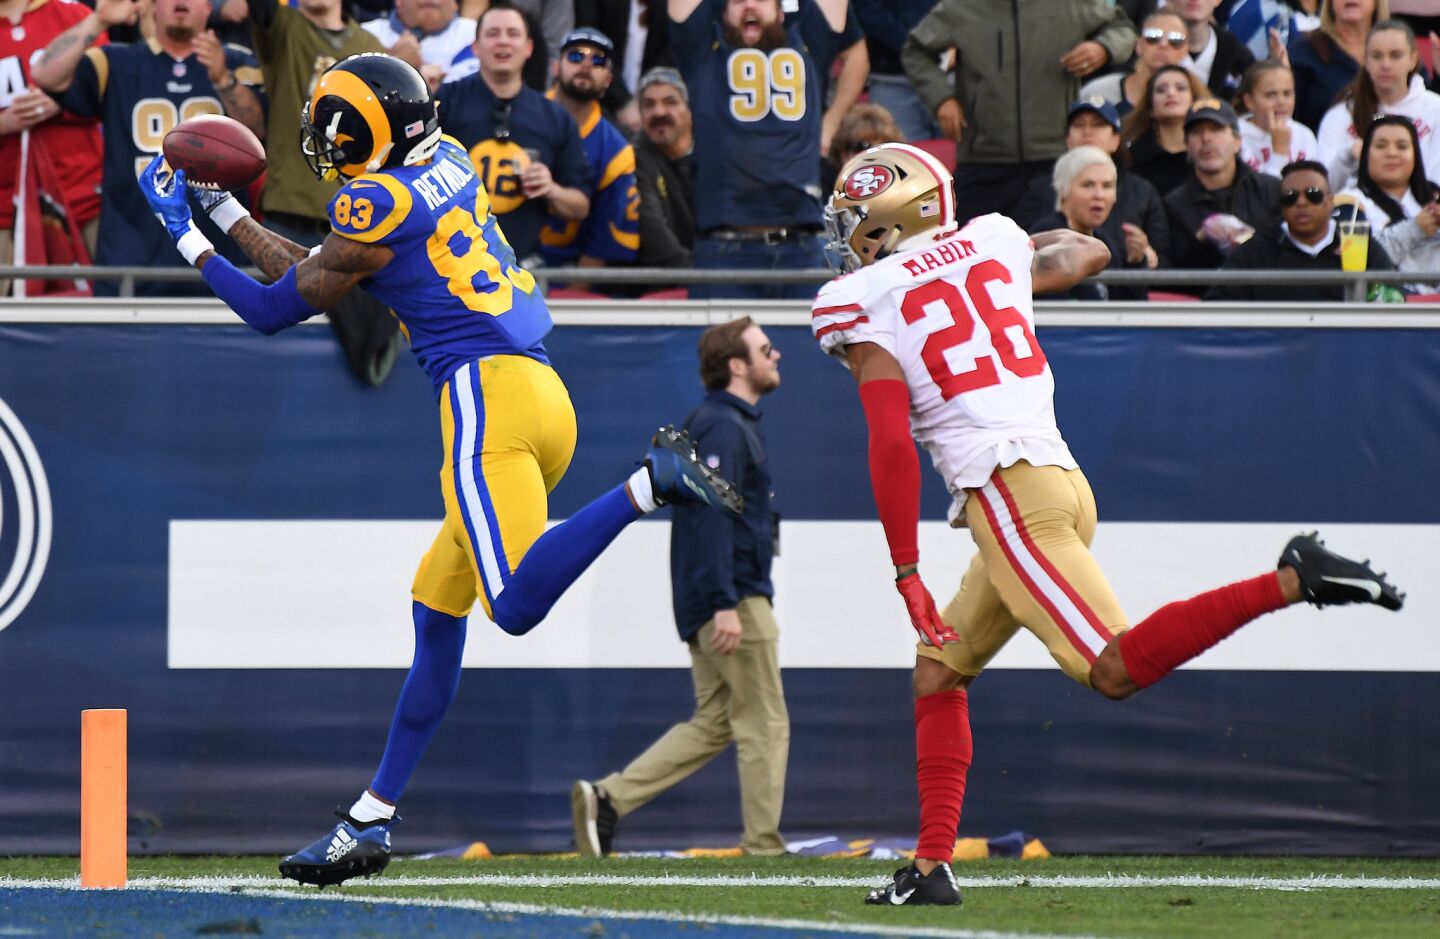 Rams receiver Josh Reynolds catches a touchdown pass in front of 49ers defensive back Greg Mabin.